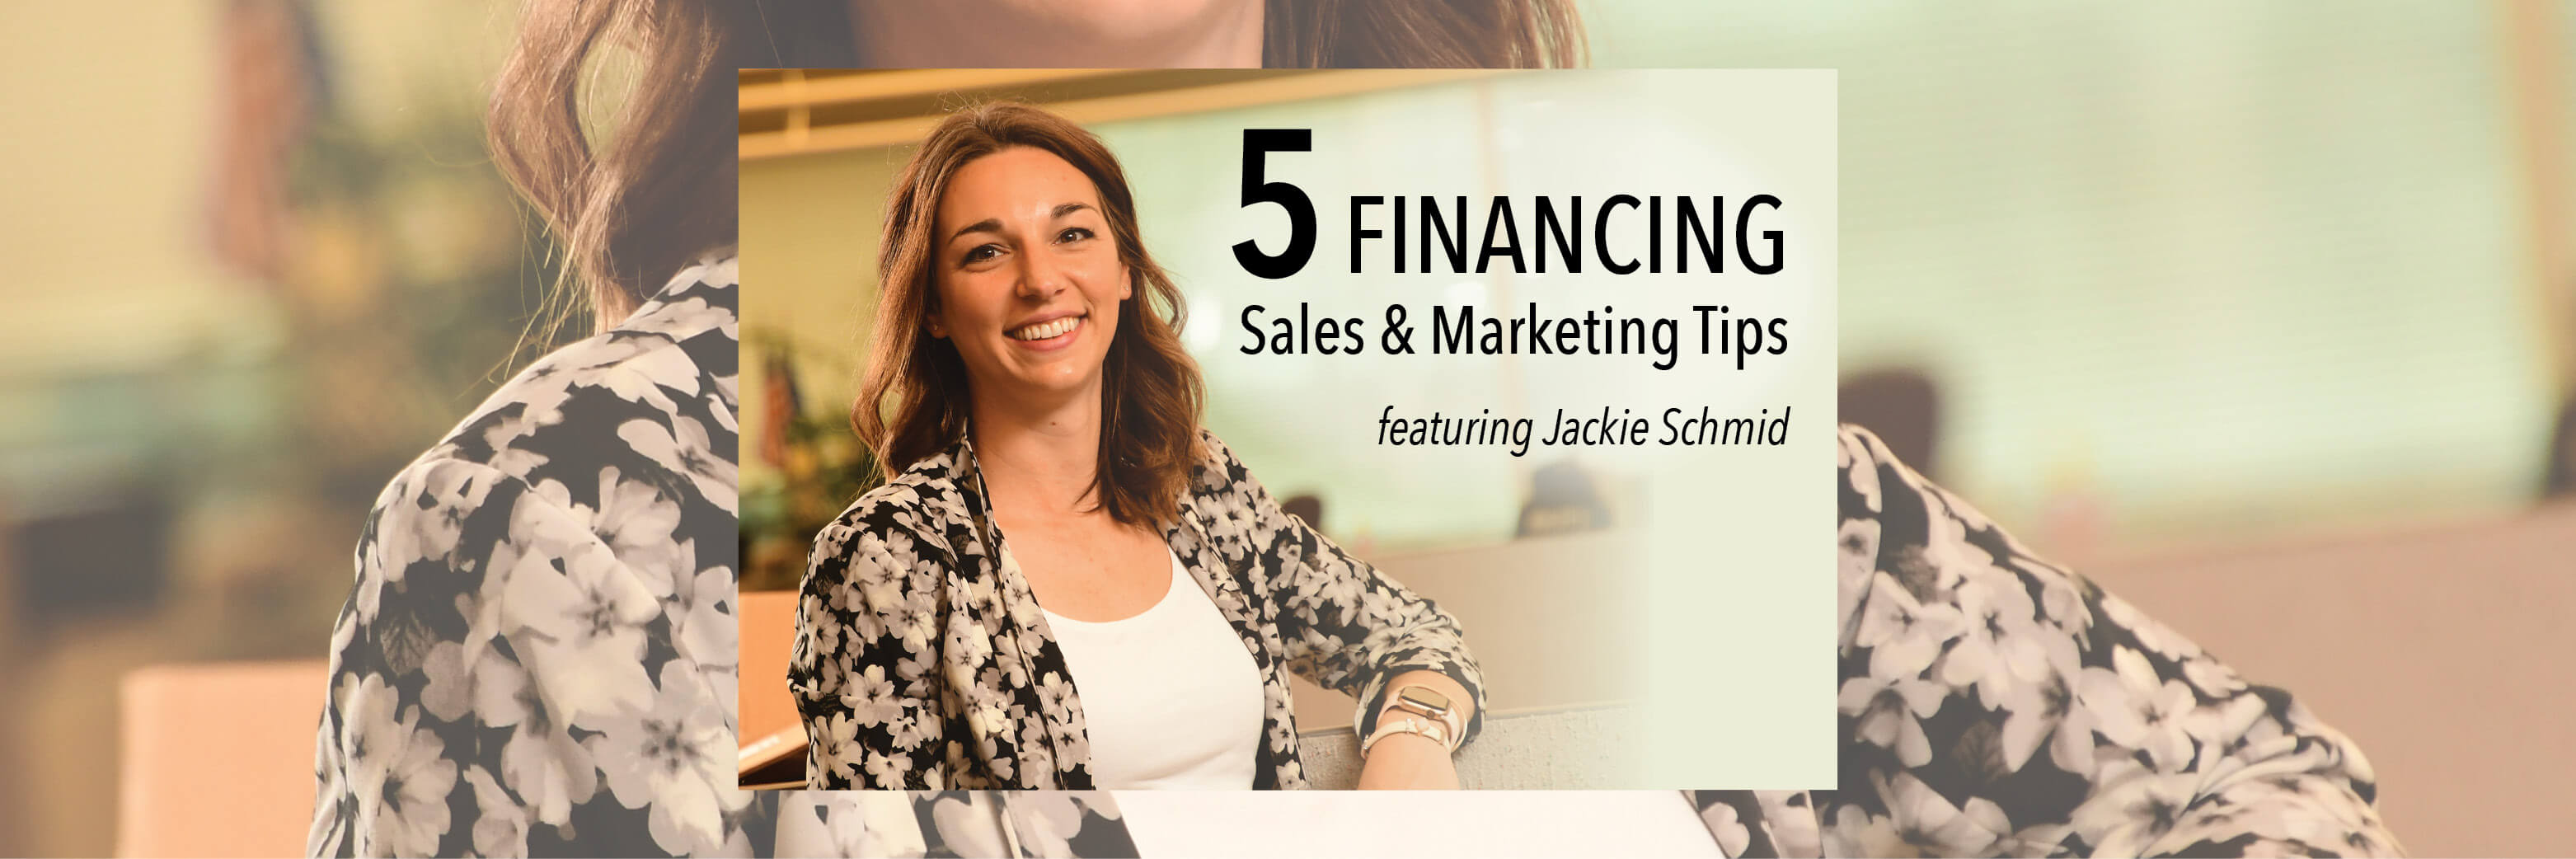 5 Financing Sales & Marketing Tips Featuring Jackie Schmid